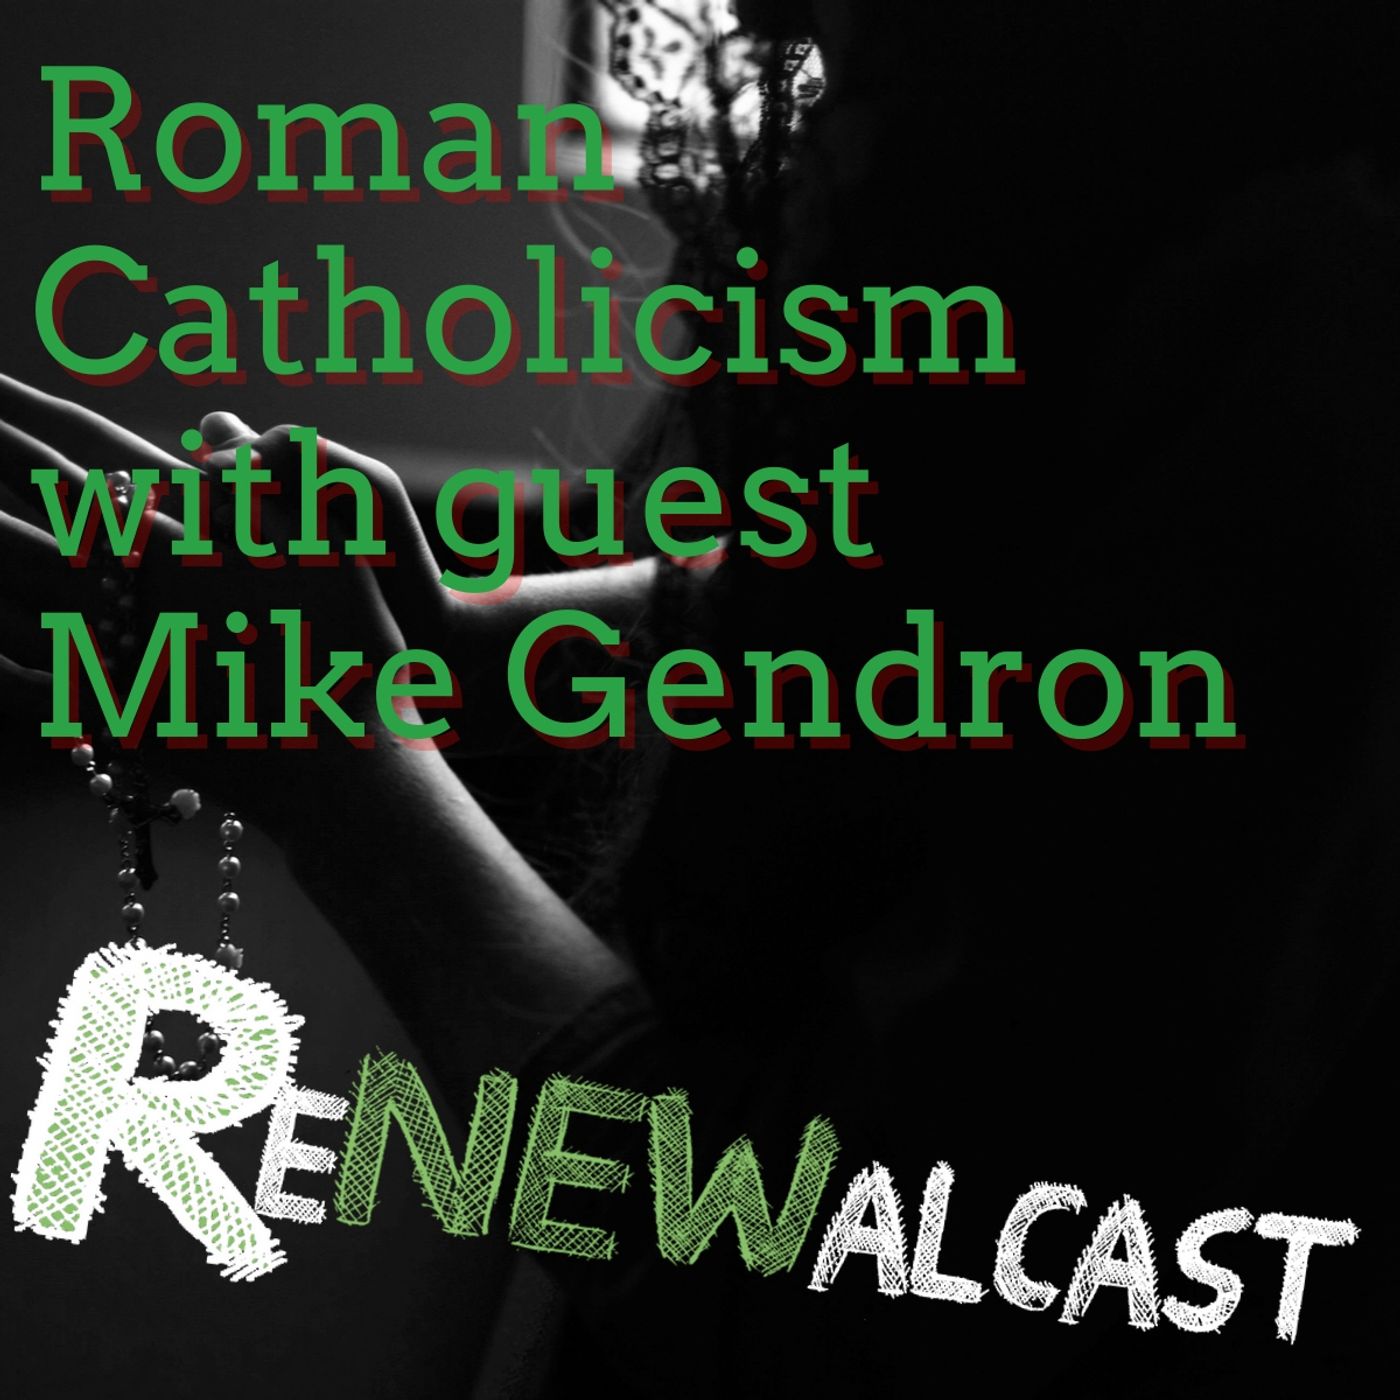 Roman Catholicism with guest Mike Gendron